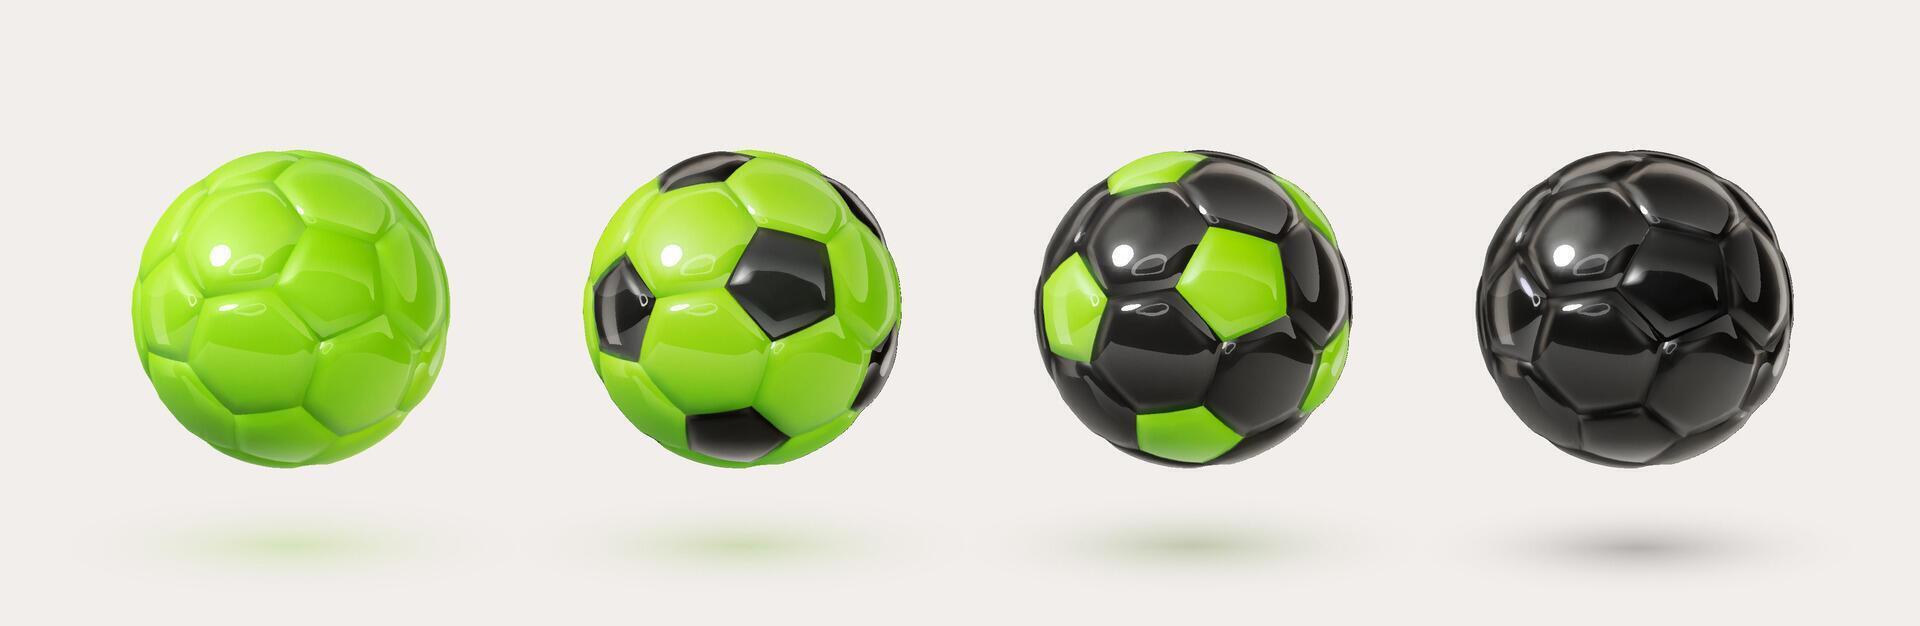 Green and black glossy football balls isolated design elements on white background. Colorful soccer balls collection. Vector 3d design elements. Sports close up icons